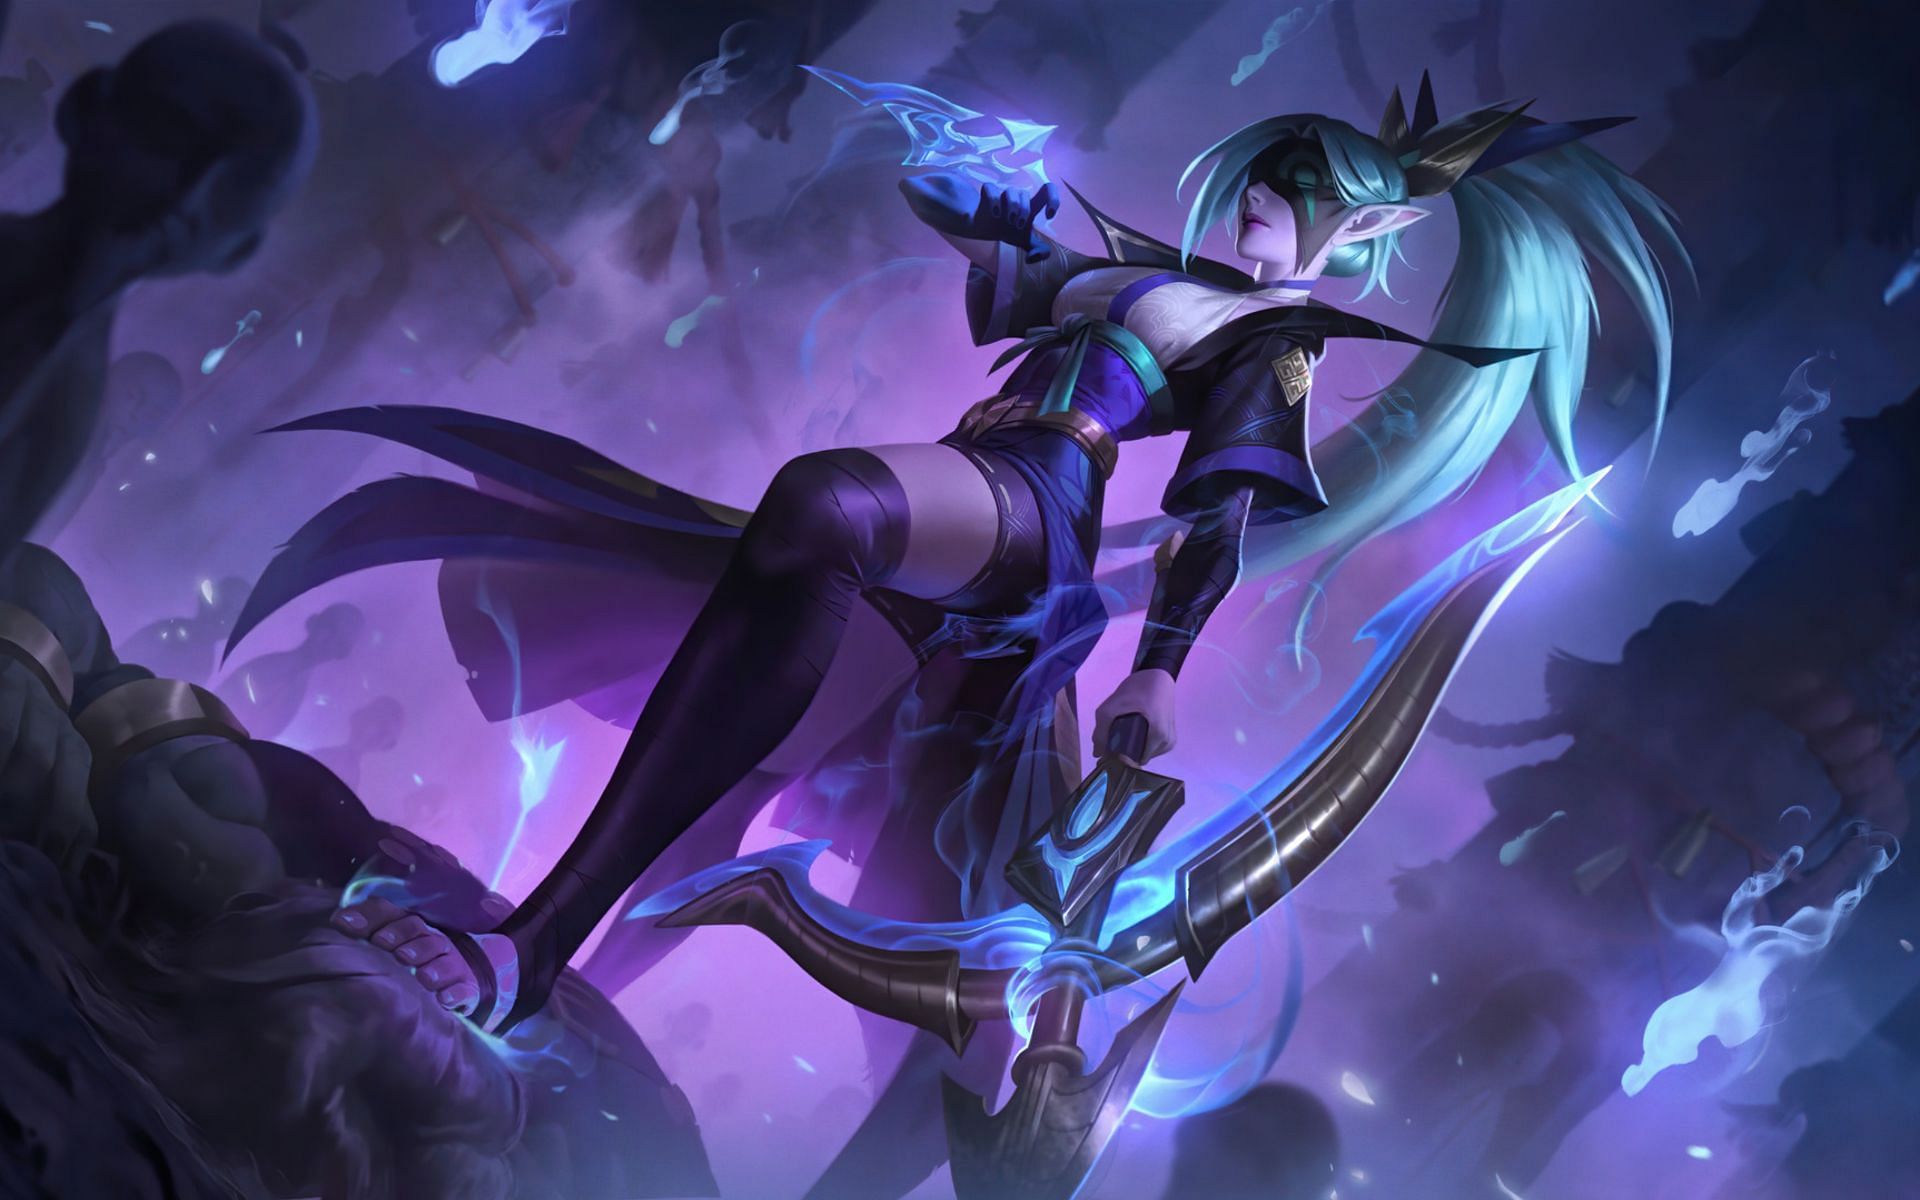 With Vayne receiving buffs in patch 13.6, players can expect her to shoot up in popularity, alongside Milio support (Image via Riot Games)